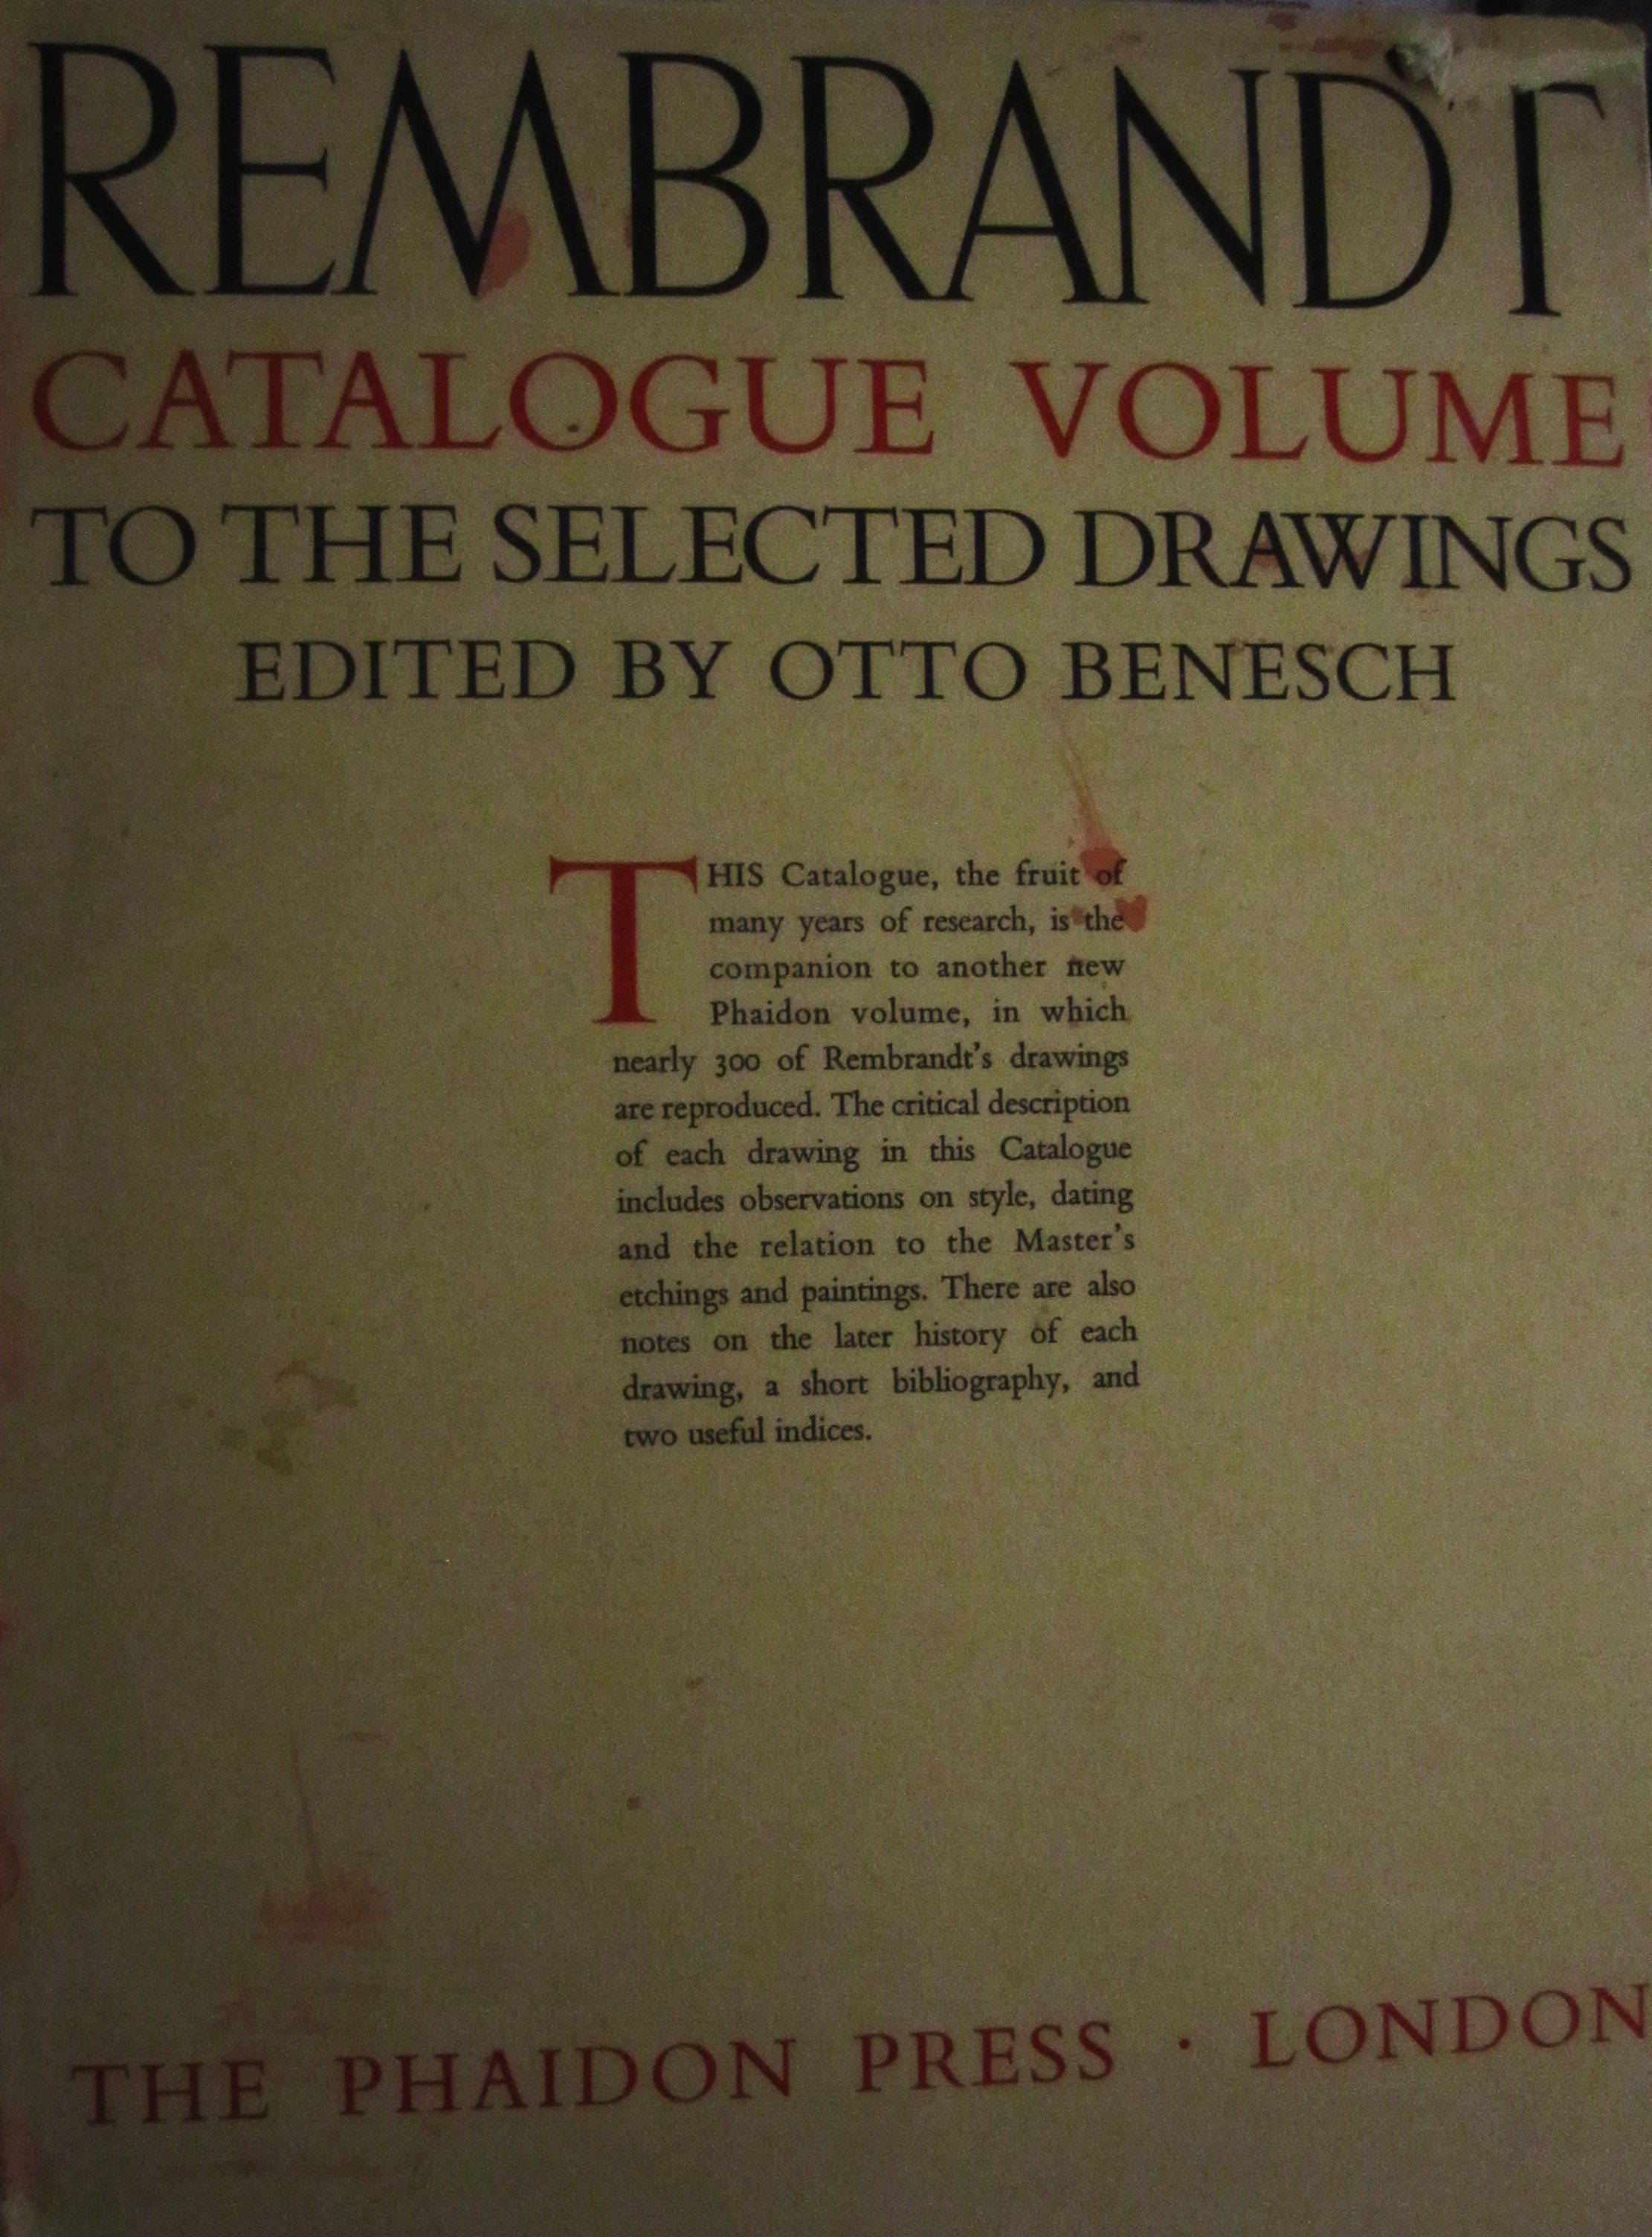 Benesch, Otto  A Catalogue of Rembrandt's Selectred Drawings 